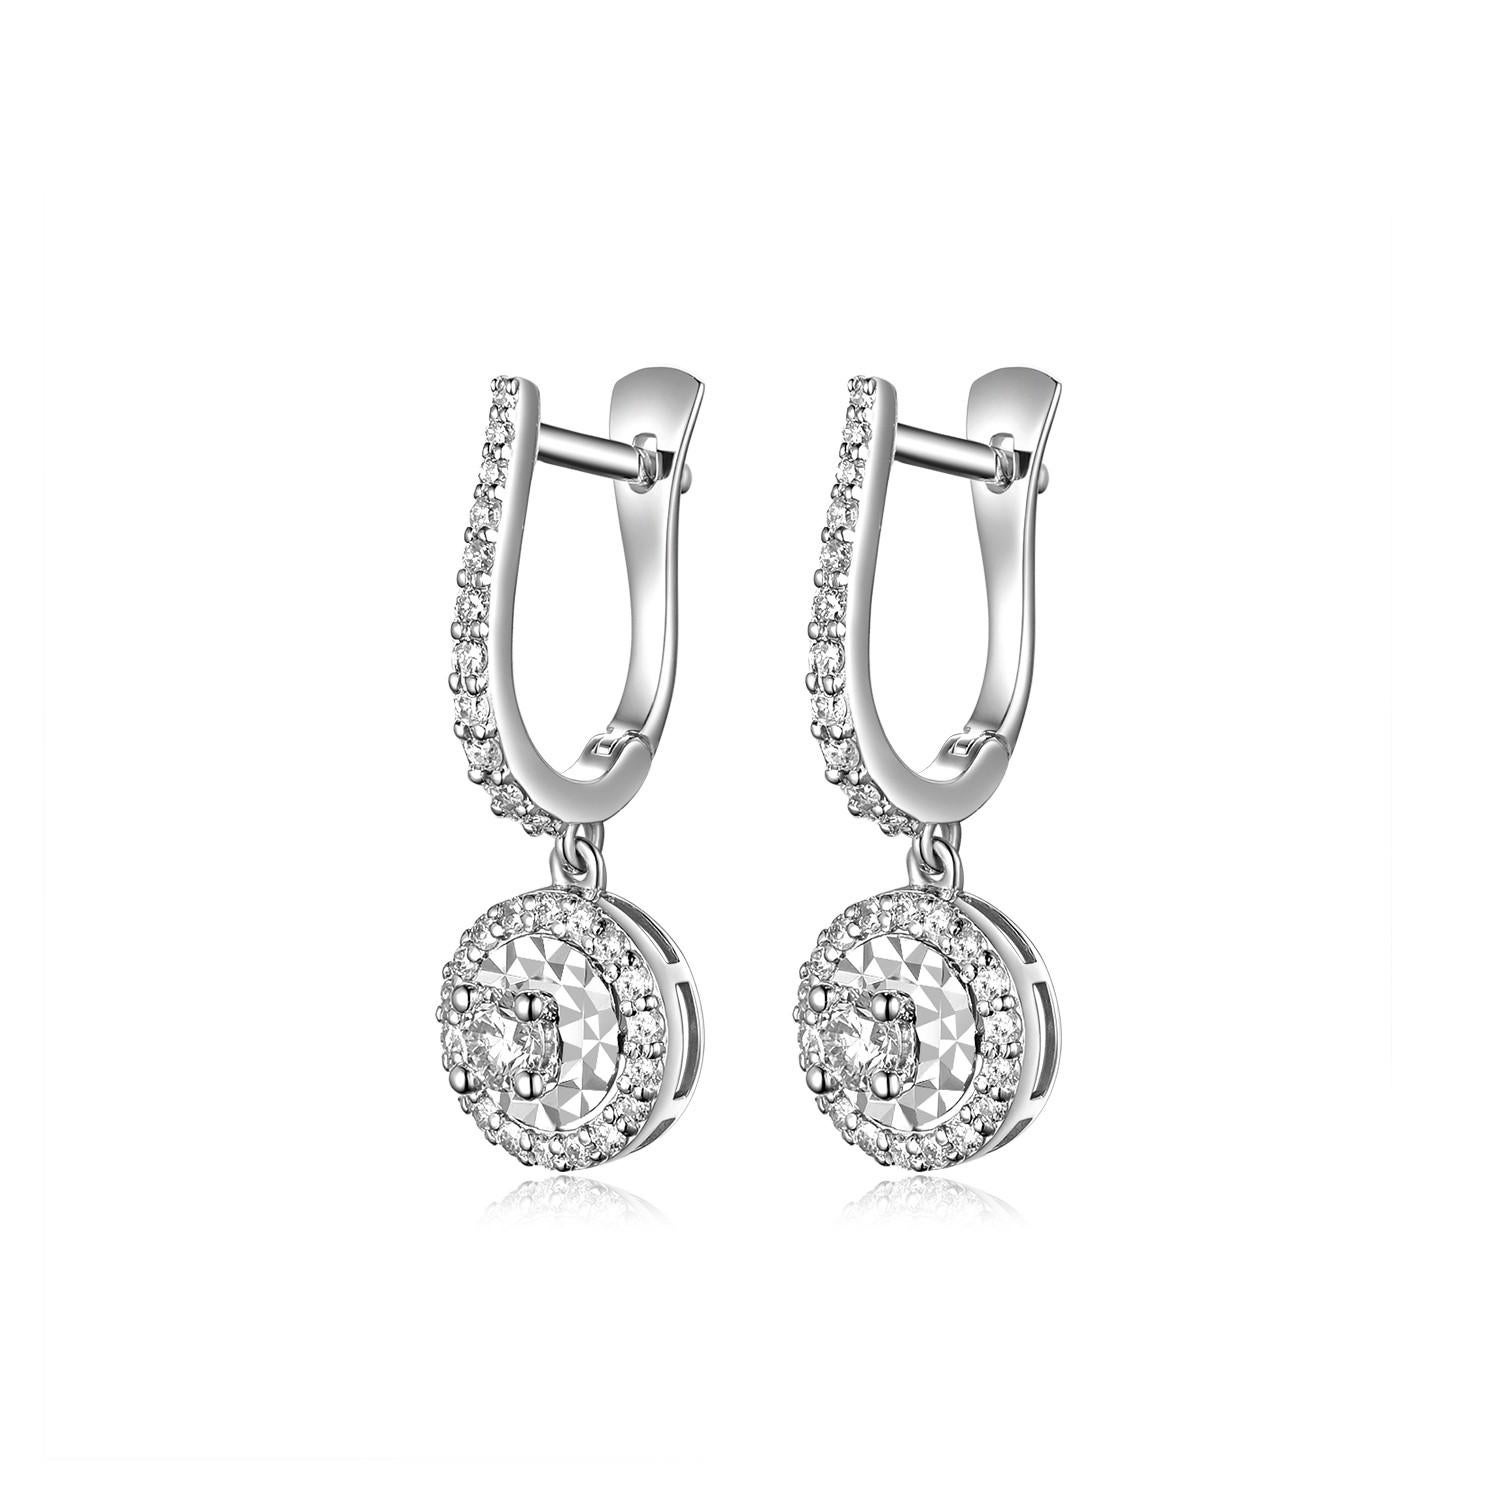 This earrings feature two 0.11 carat diamond at the center of each earring, assented with 0.48 carat of small diamonds. The center diamond is set with an illusion setting making the center part larger. Great for everyday-use. Earrings are set in 18